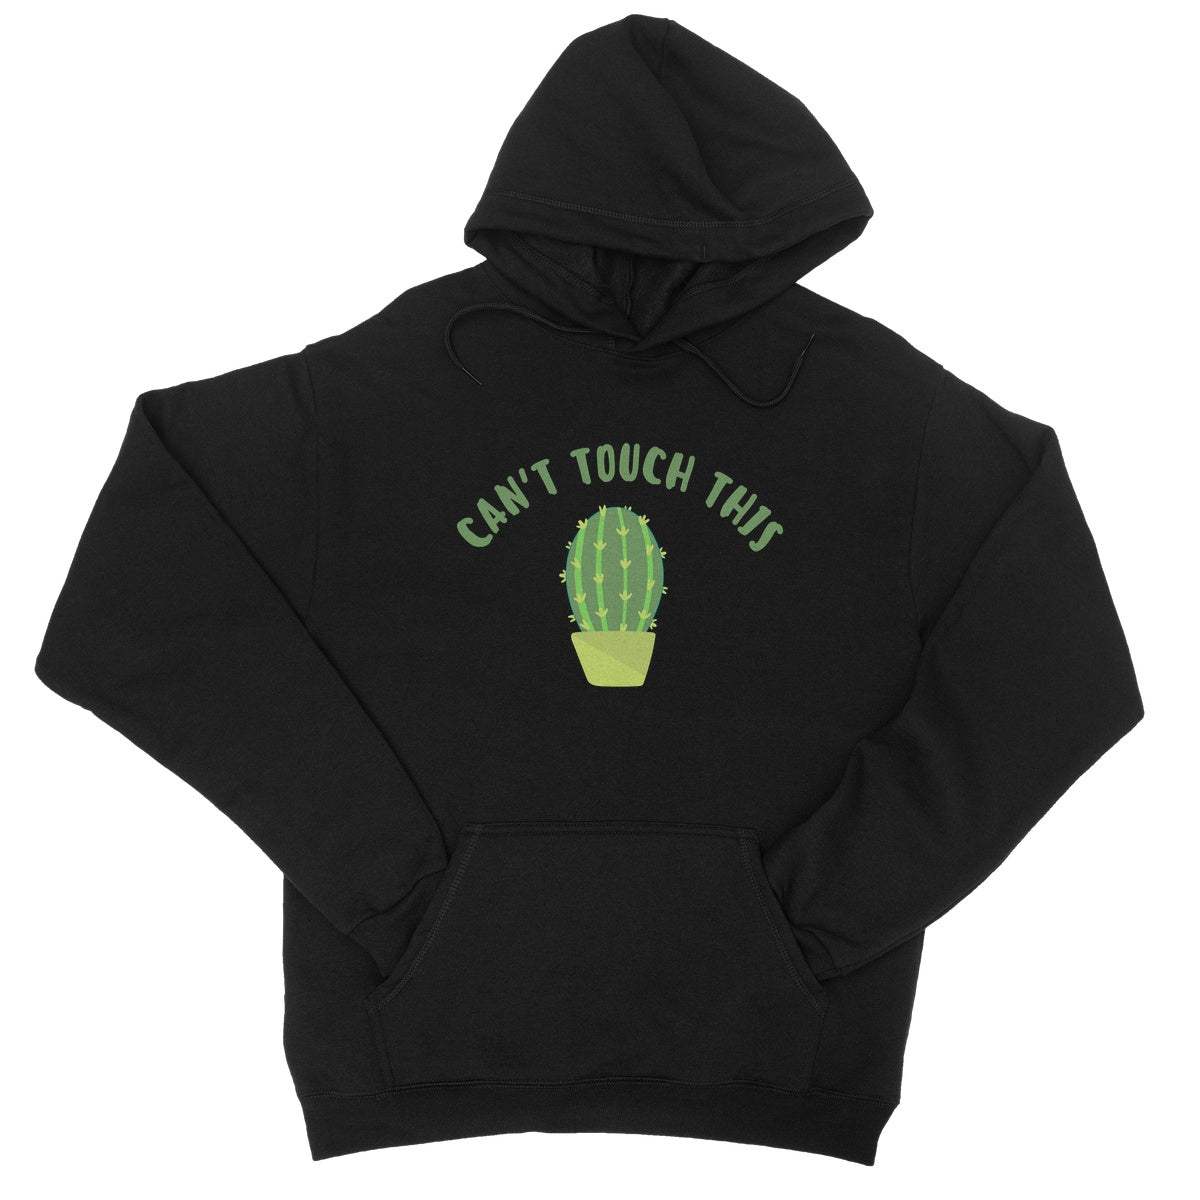 can't touch this hoodie black